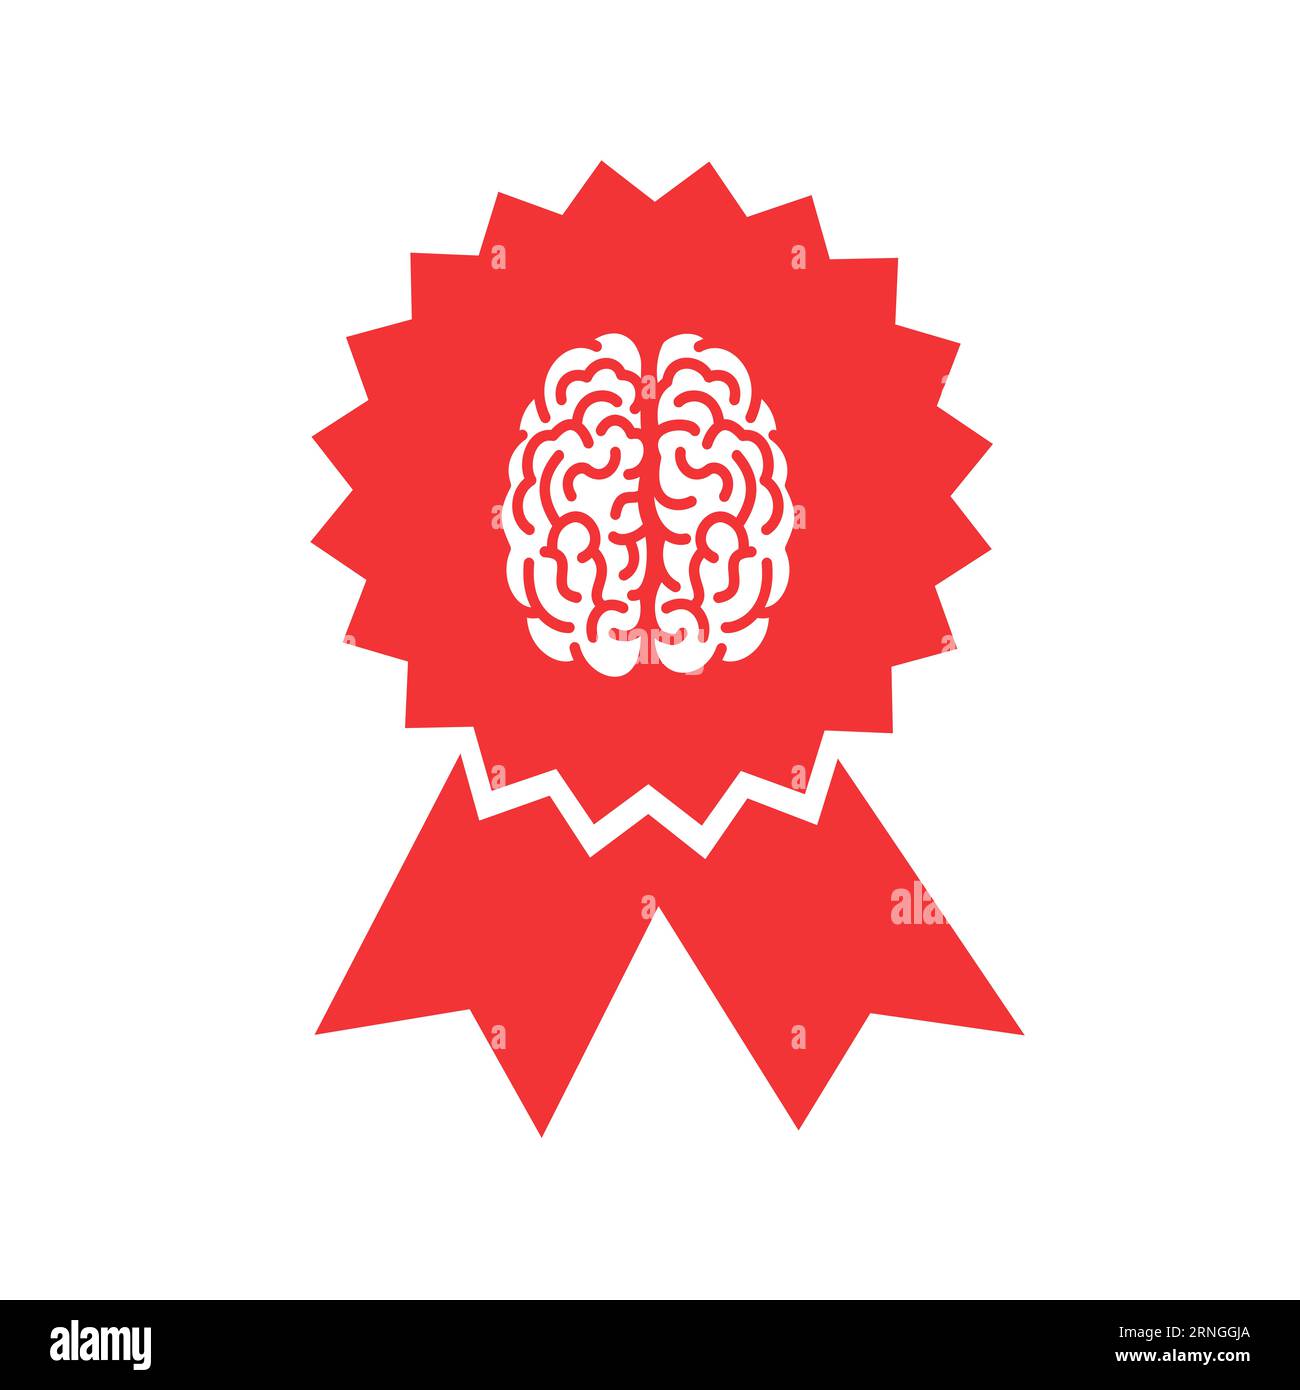 Intelligence certificate - ribbon, medal and stamp with brain as symbol of intelligent, bright, clever and smart intellect and high IQ. Vector illustr Stock Photo